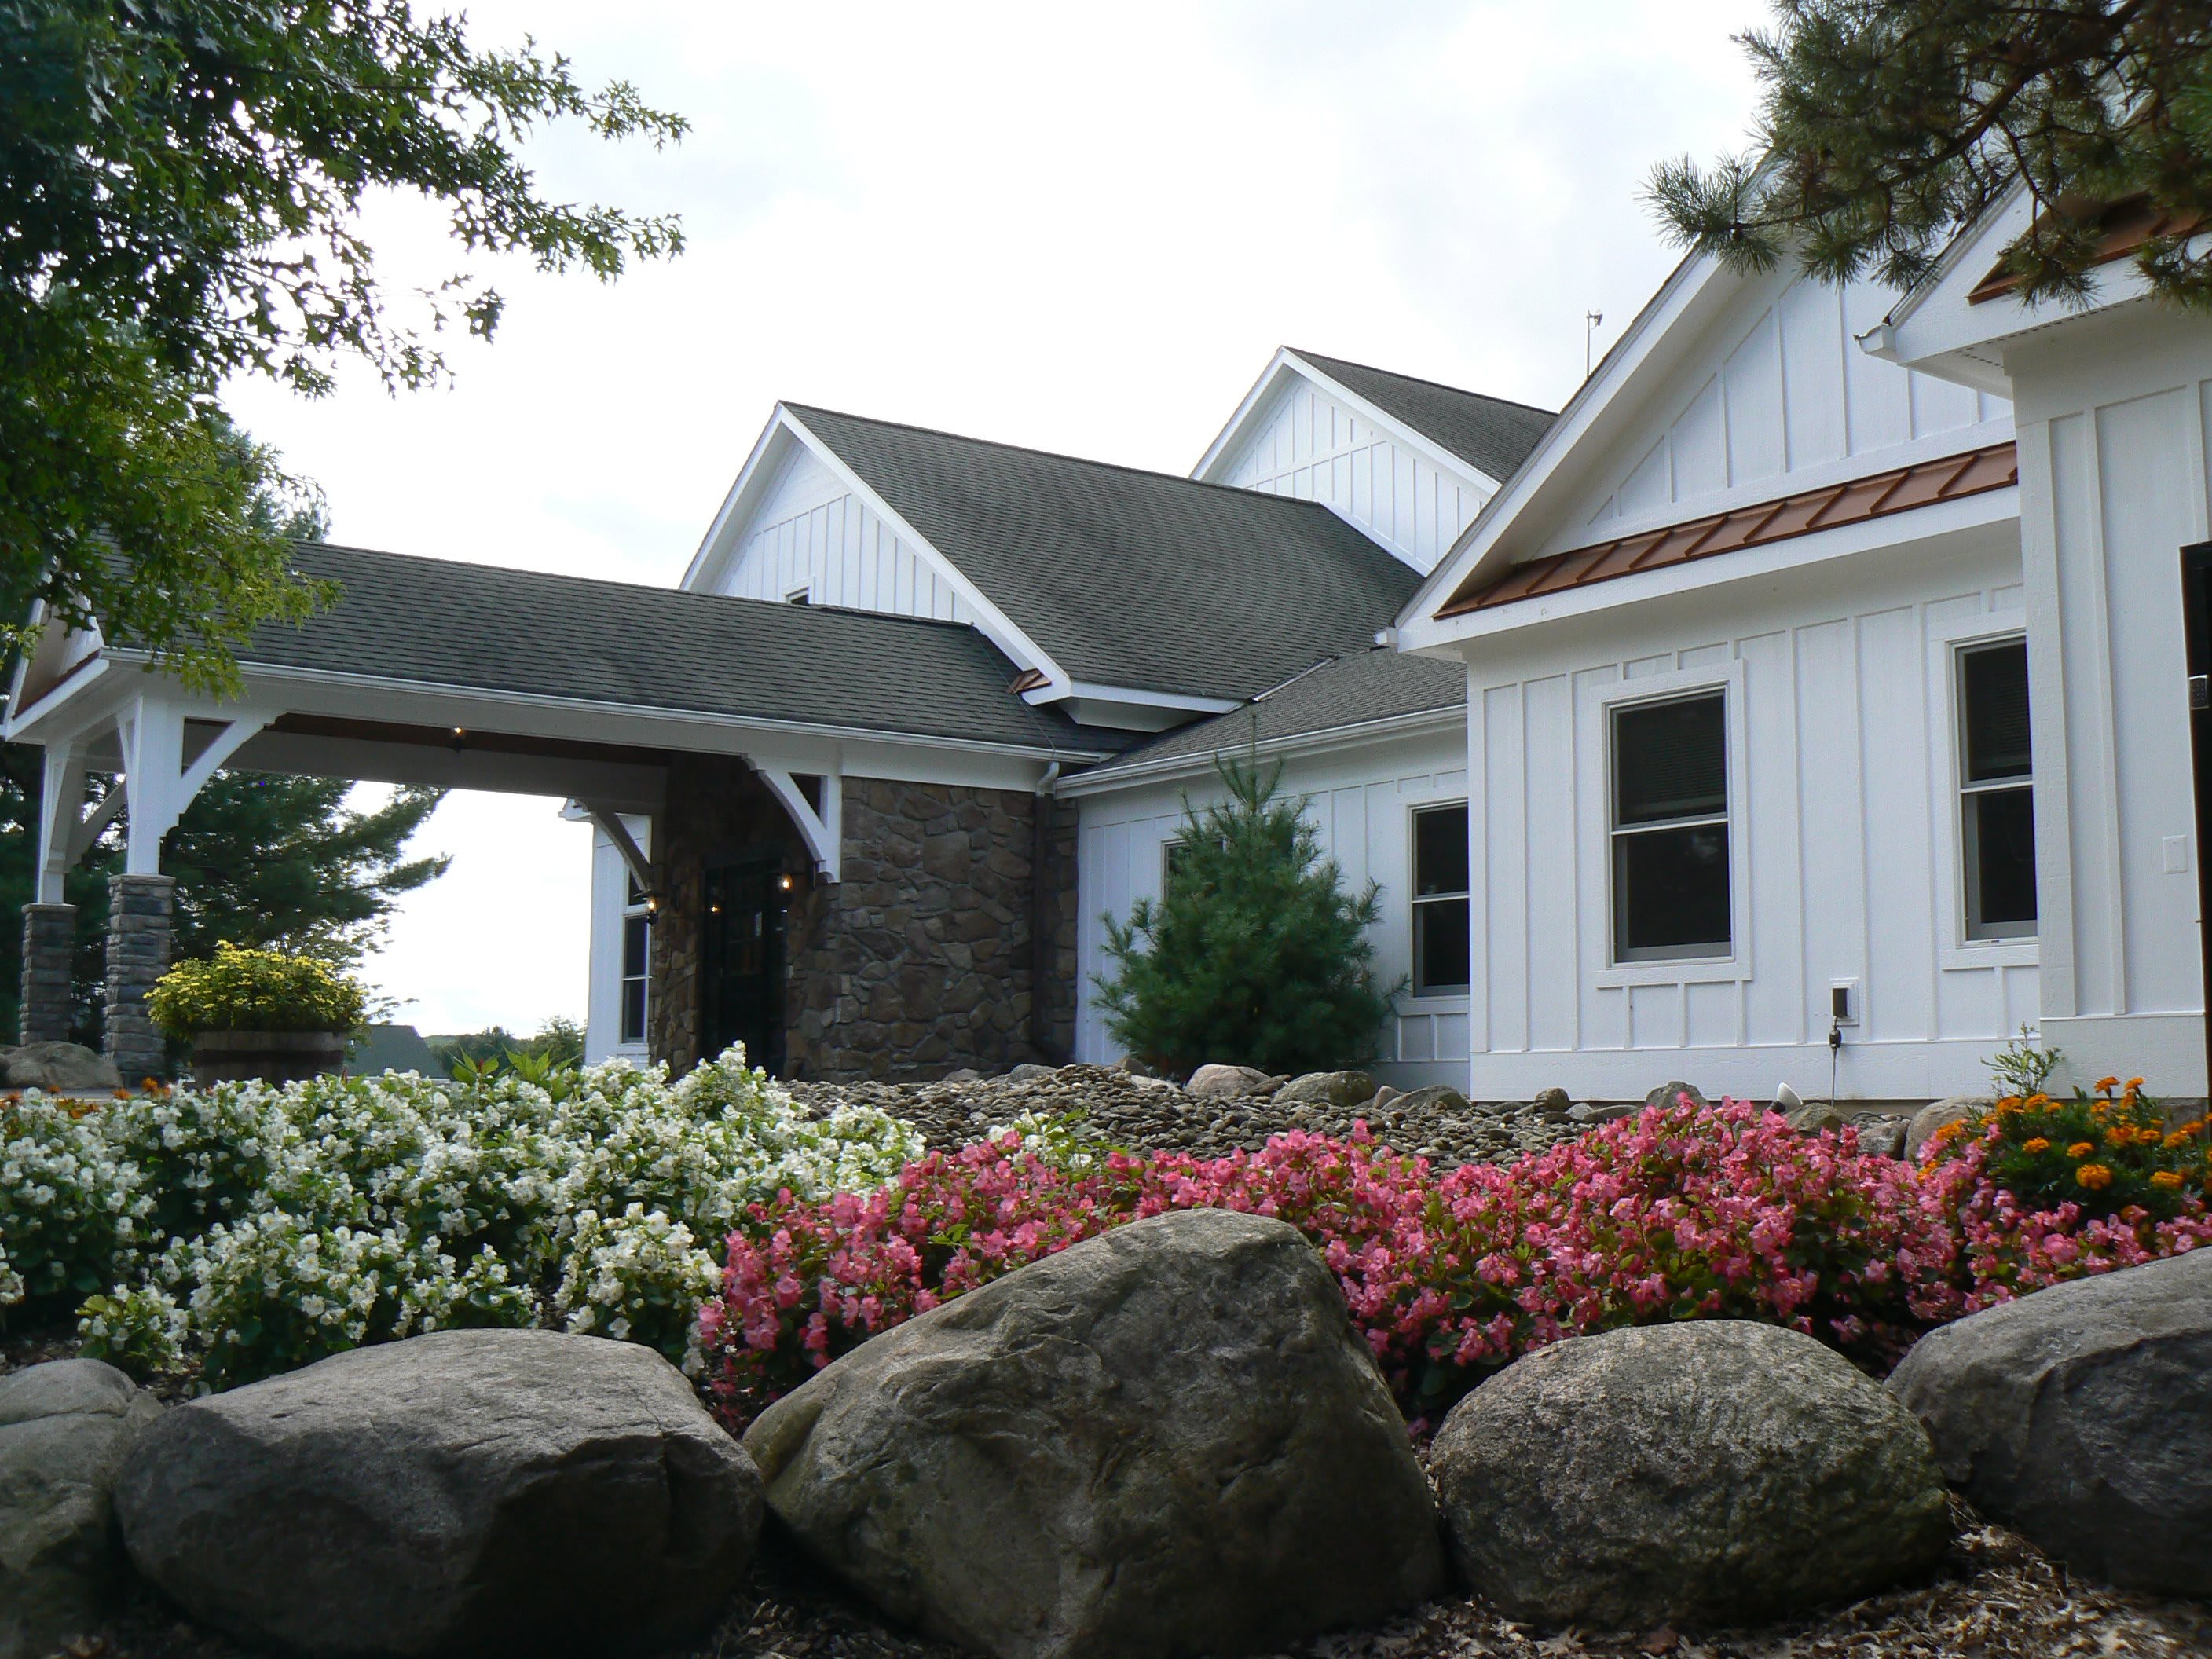 The Inn at the Pines community exterior